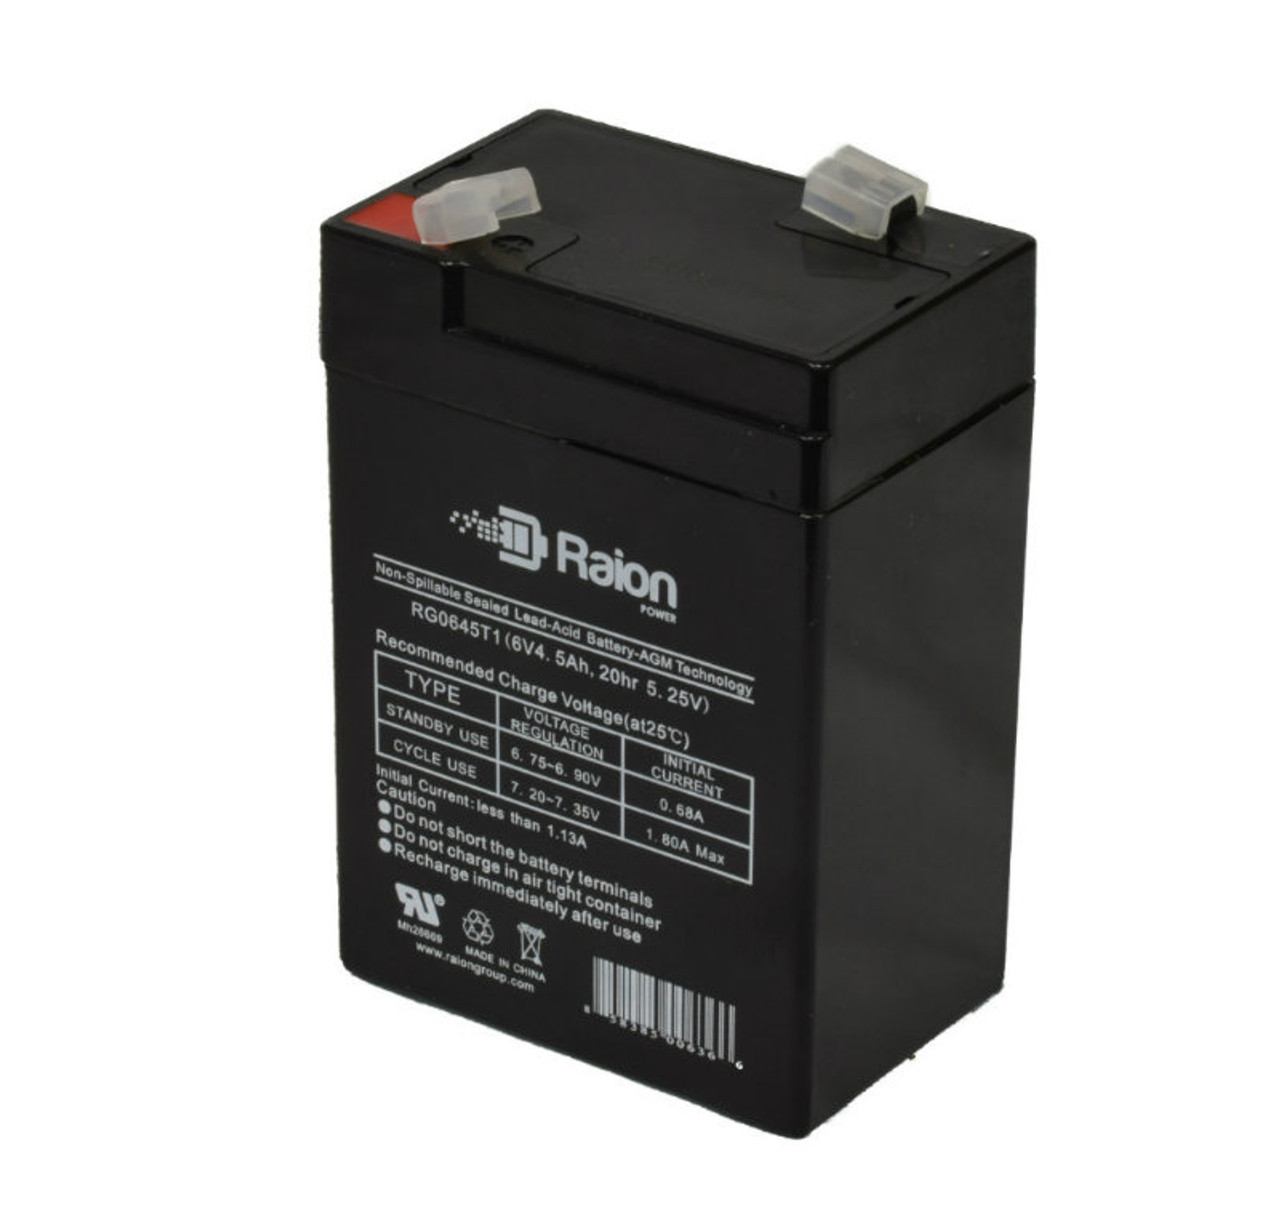 Raion Power RG0645T1 6V 4.5Ah Replacement Battery Cartridge for National Power GF010R7